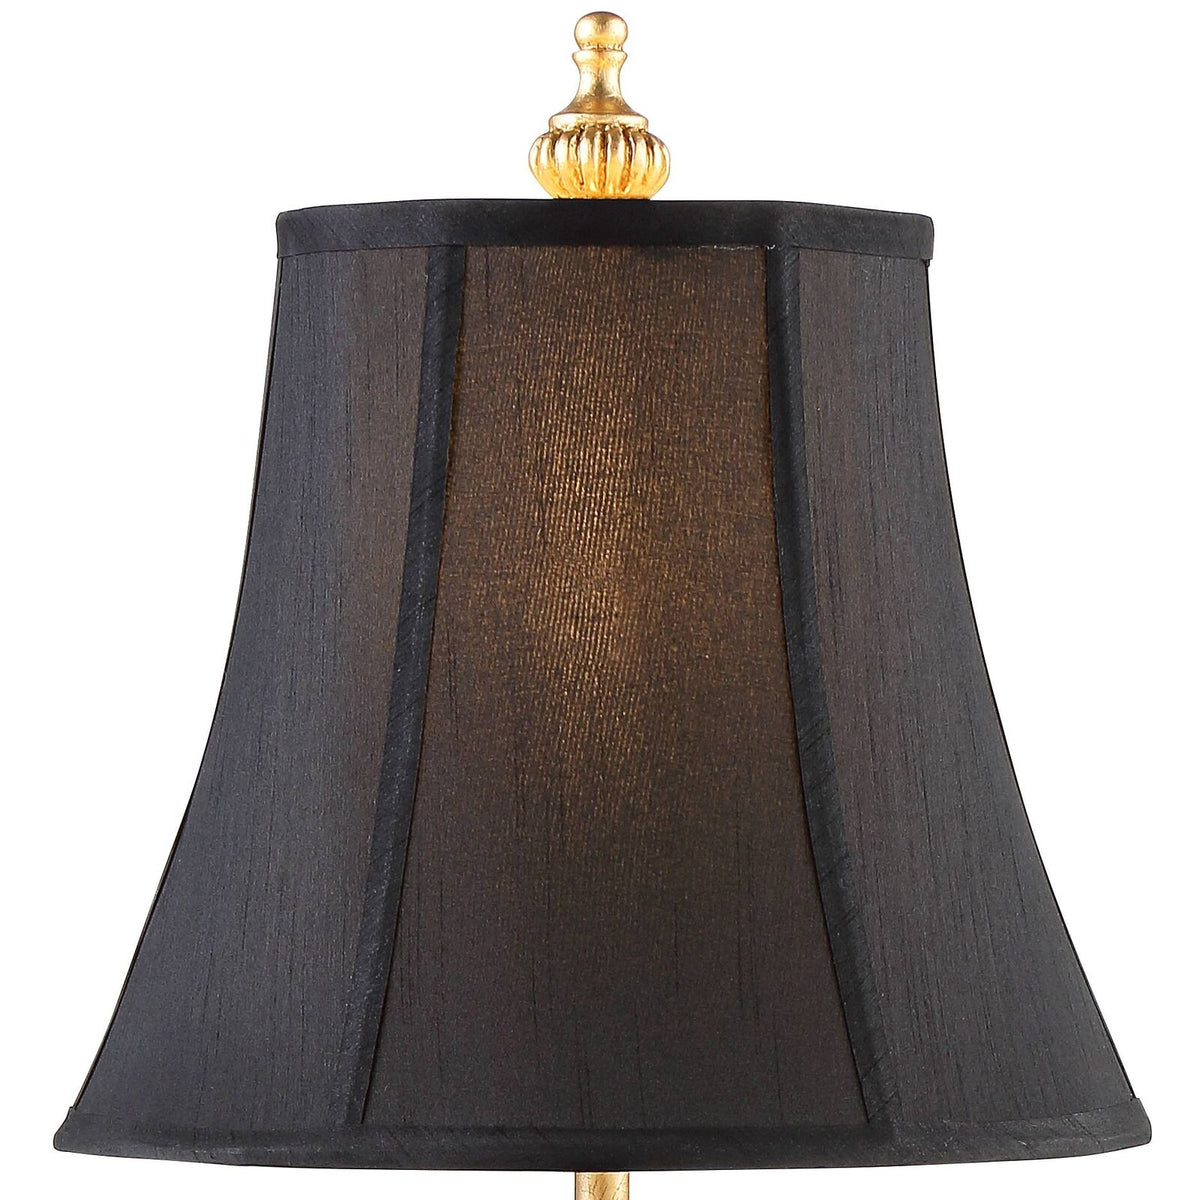 Set of 2 Black Shade Buffet Table Lamps Living Room and Dining Room Decor